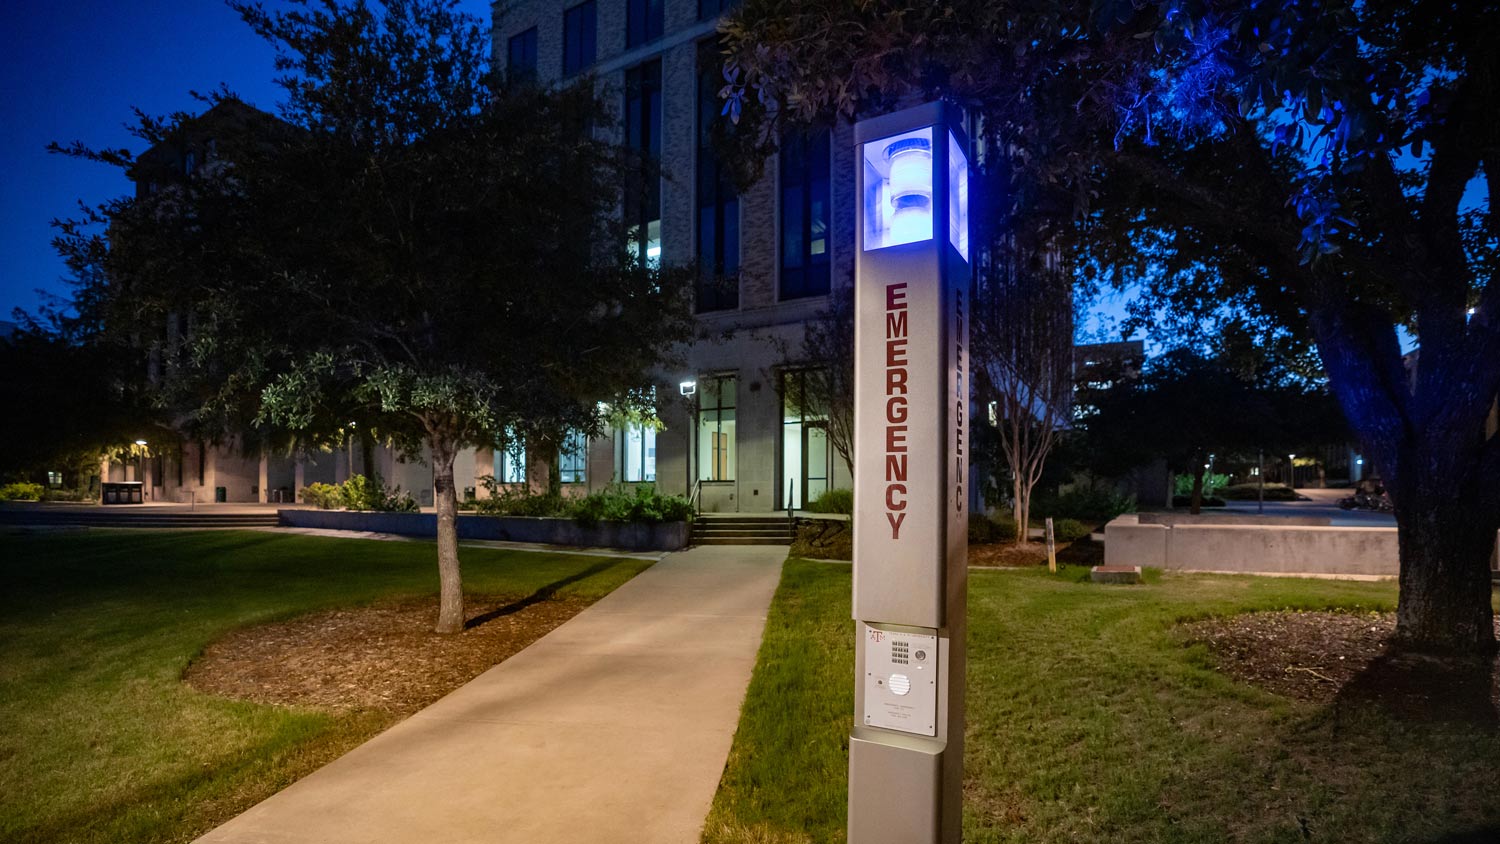 Silver emergency phone pole with blue light lit as dusk sets on campus